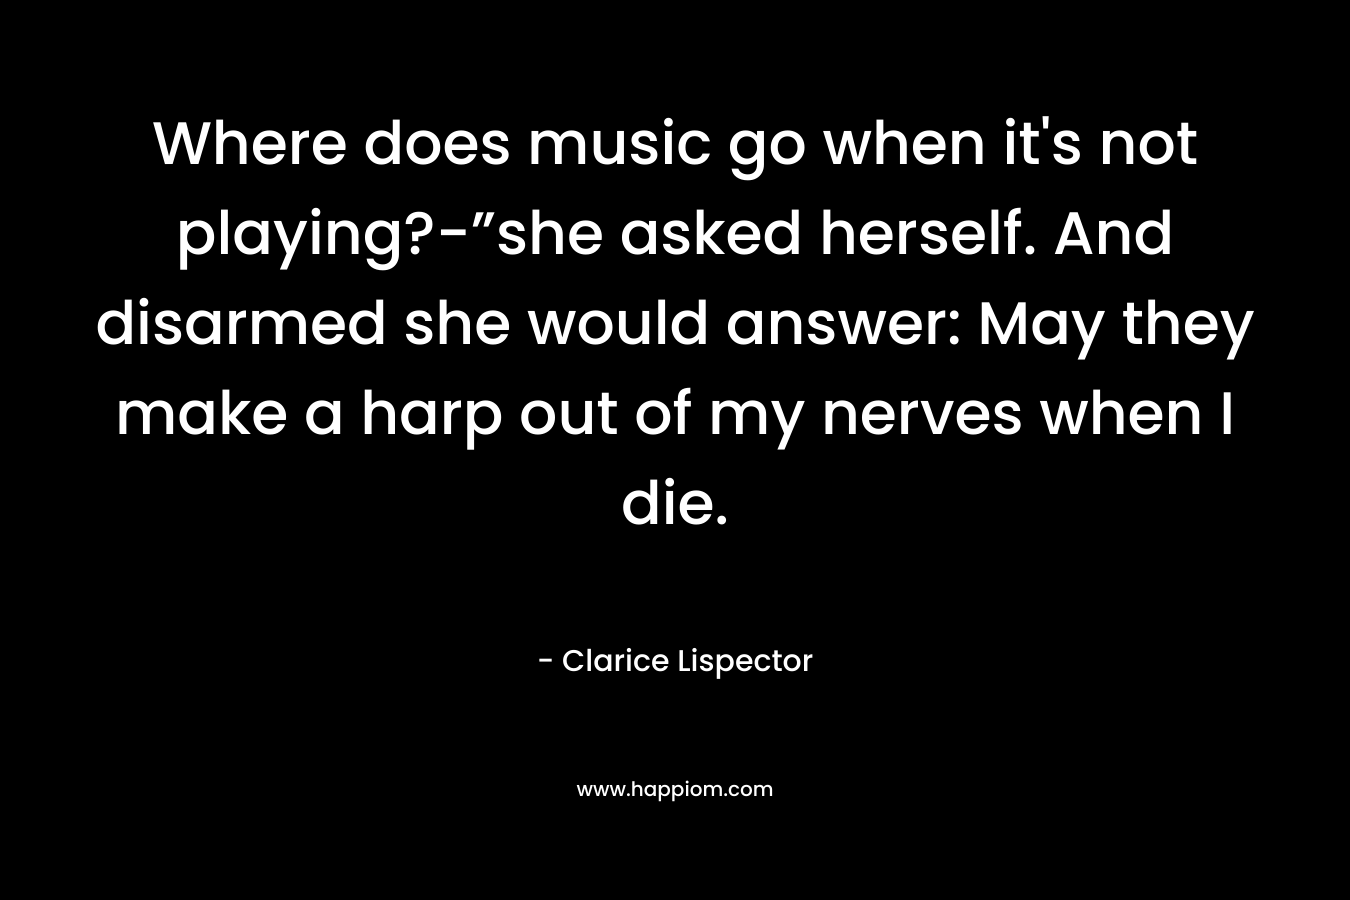 Where does music go when it’s not playing?-”she asked herself. And disarmed she would answer: May they make a harp out of my nerves when I die. – Clarice Lispector